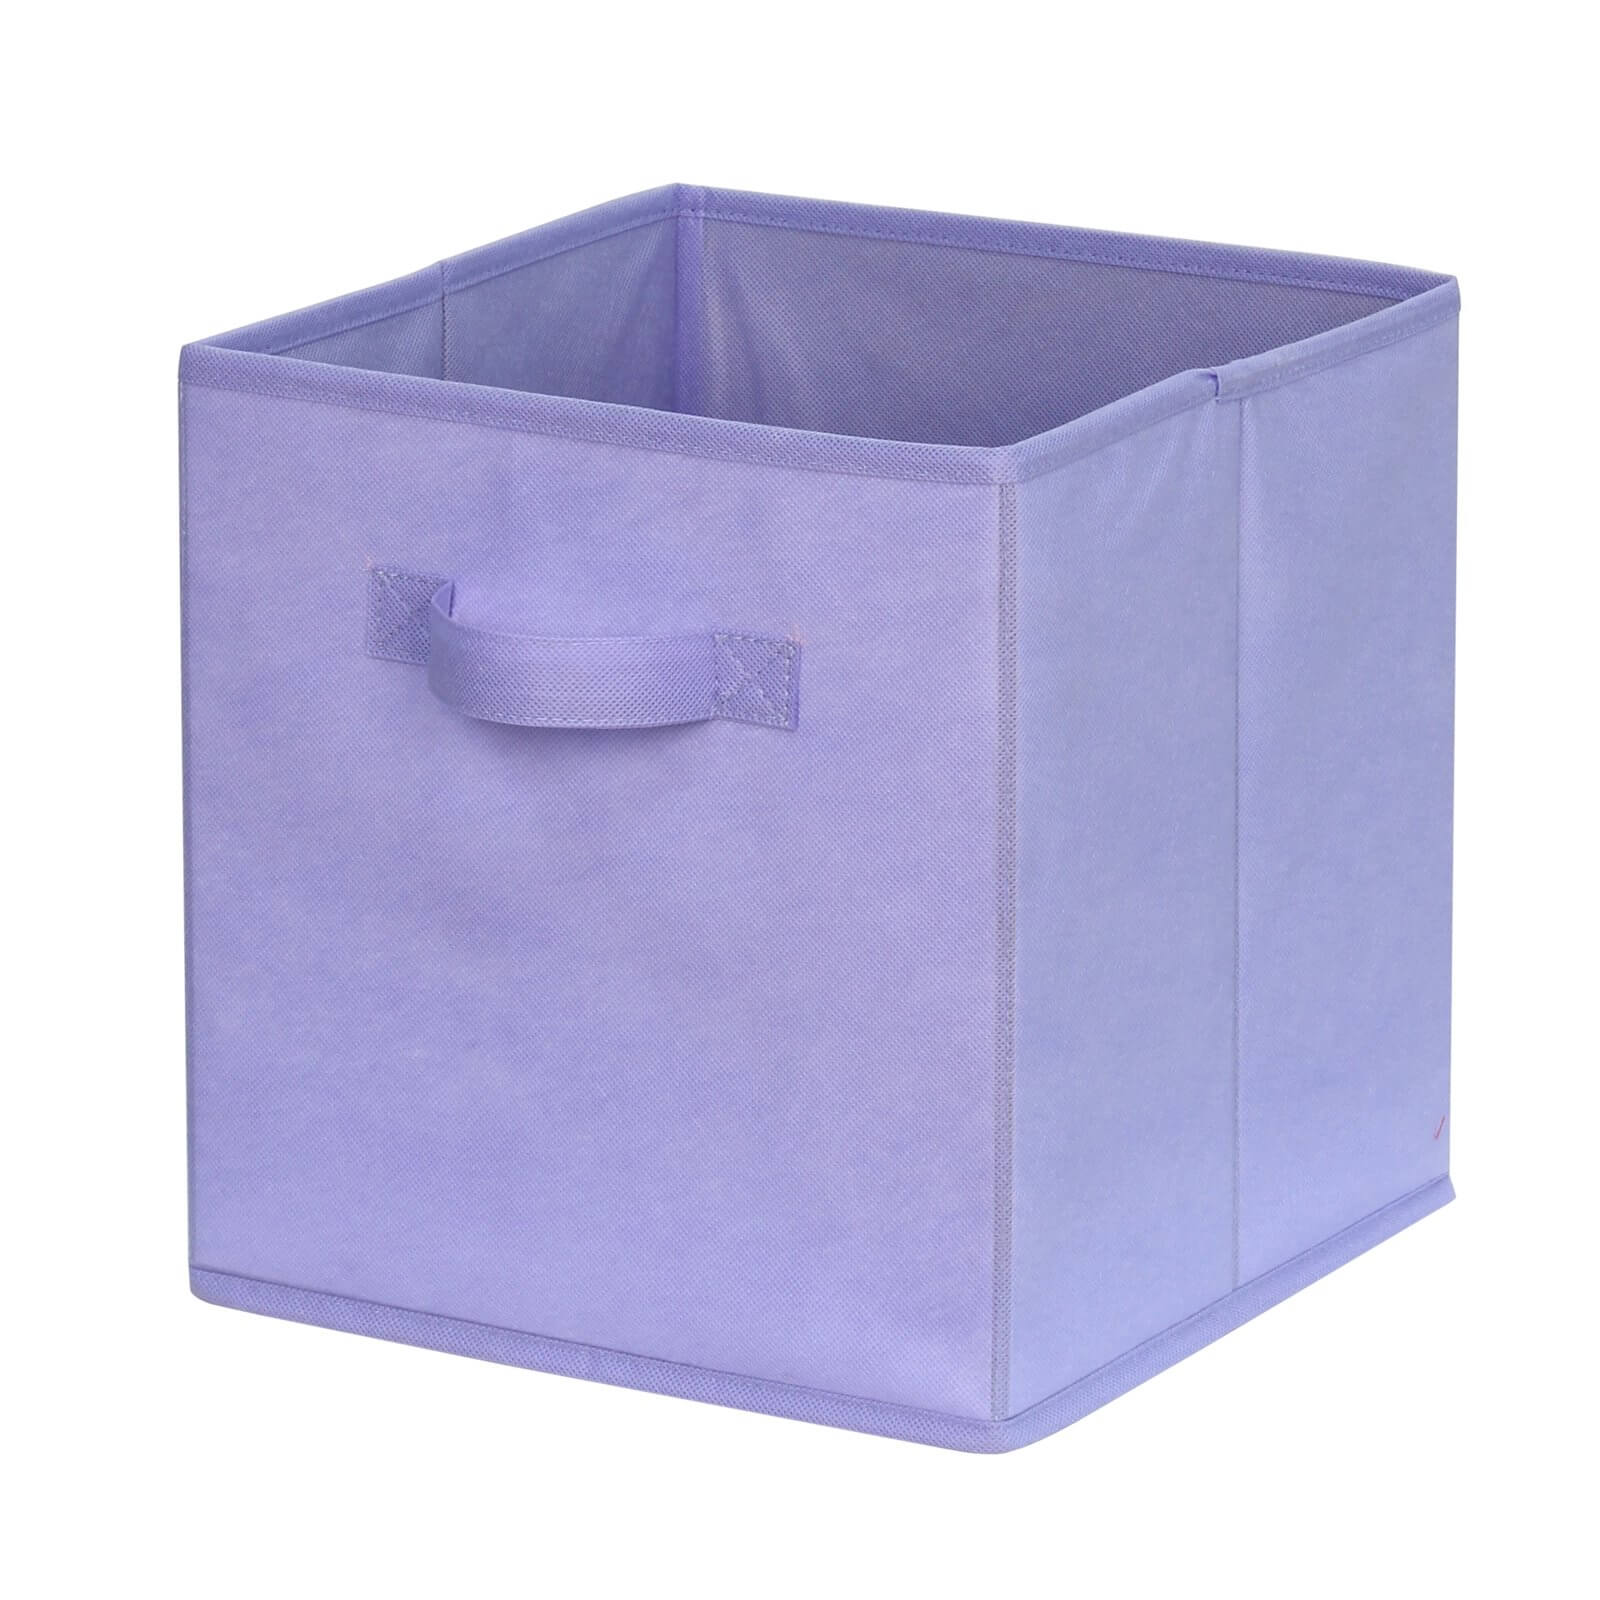 Compact Cube Fabric Insert - Lilac